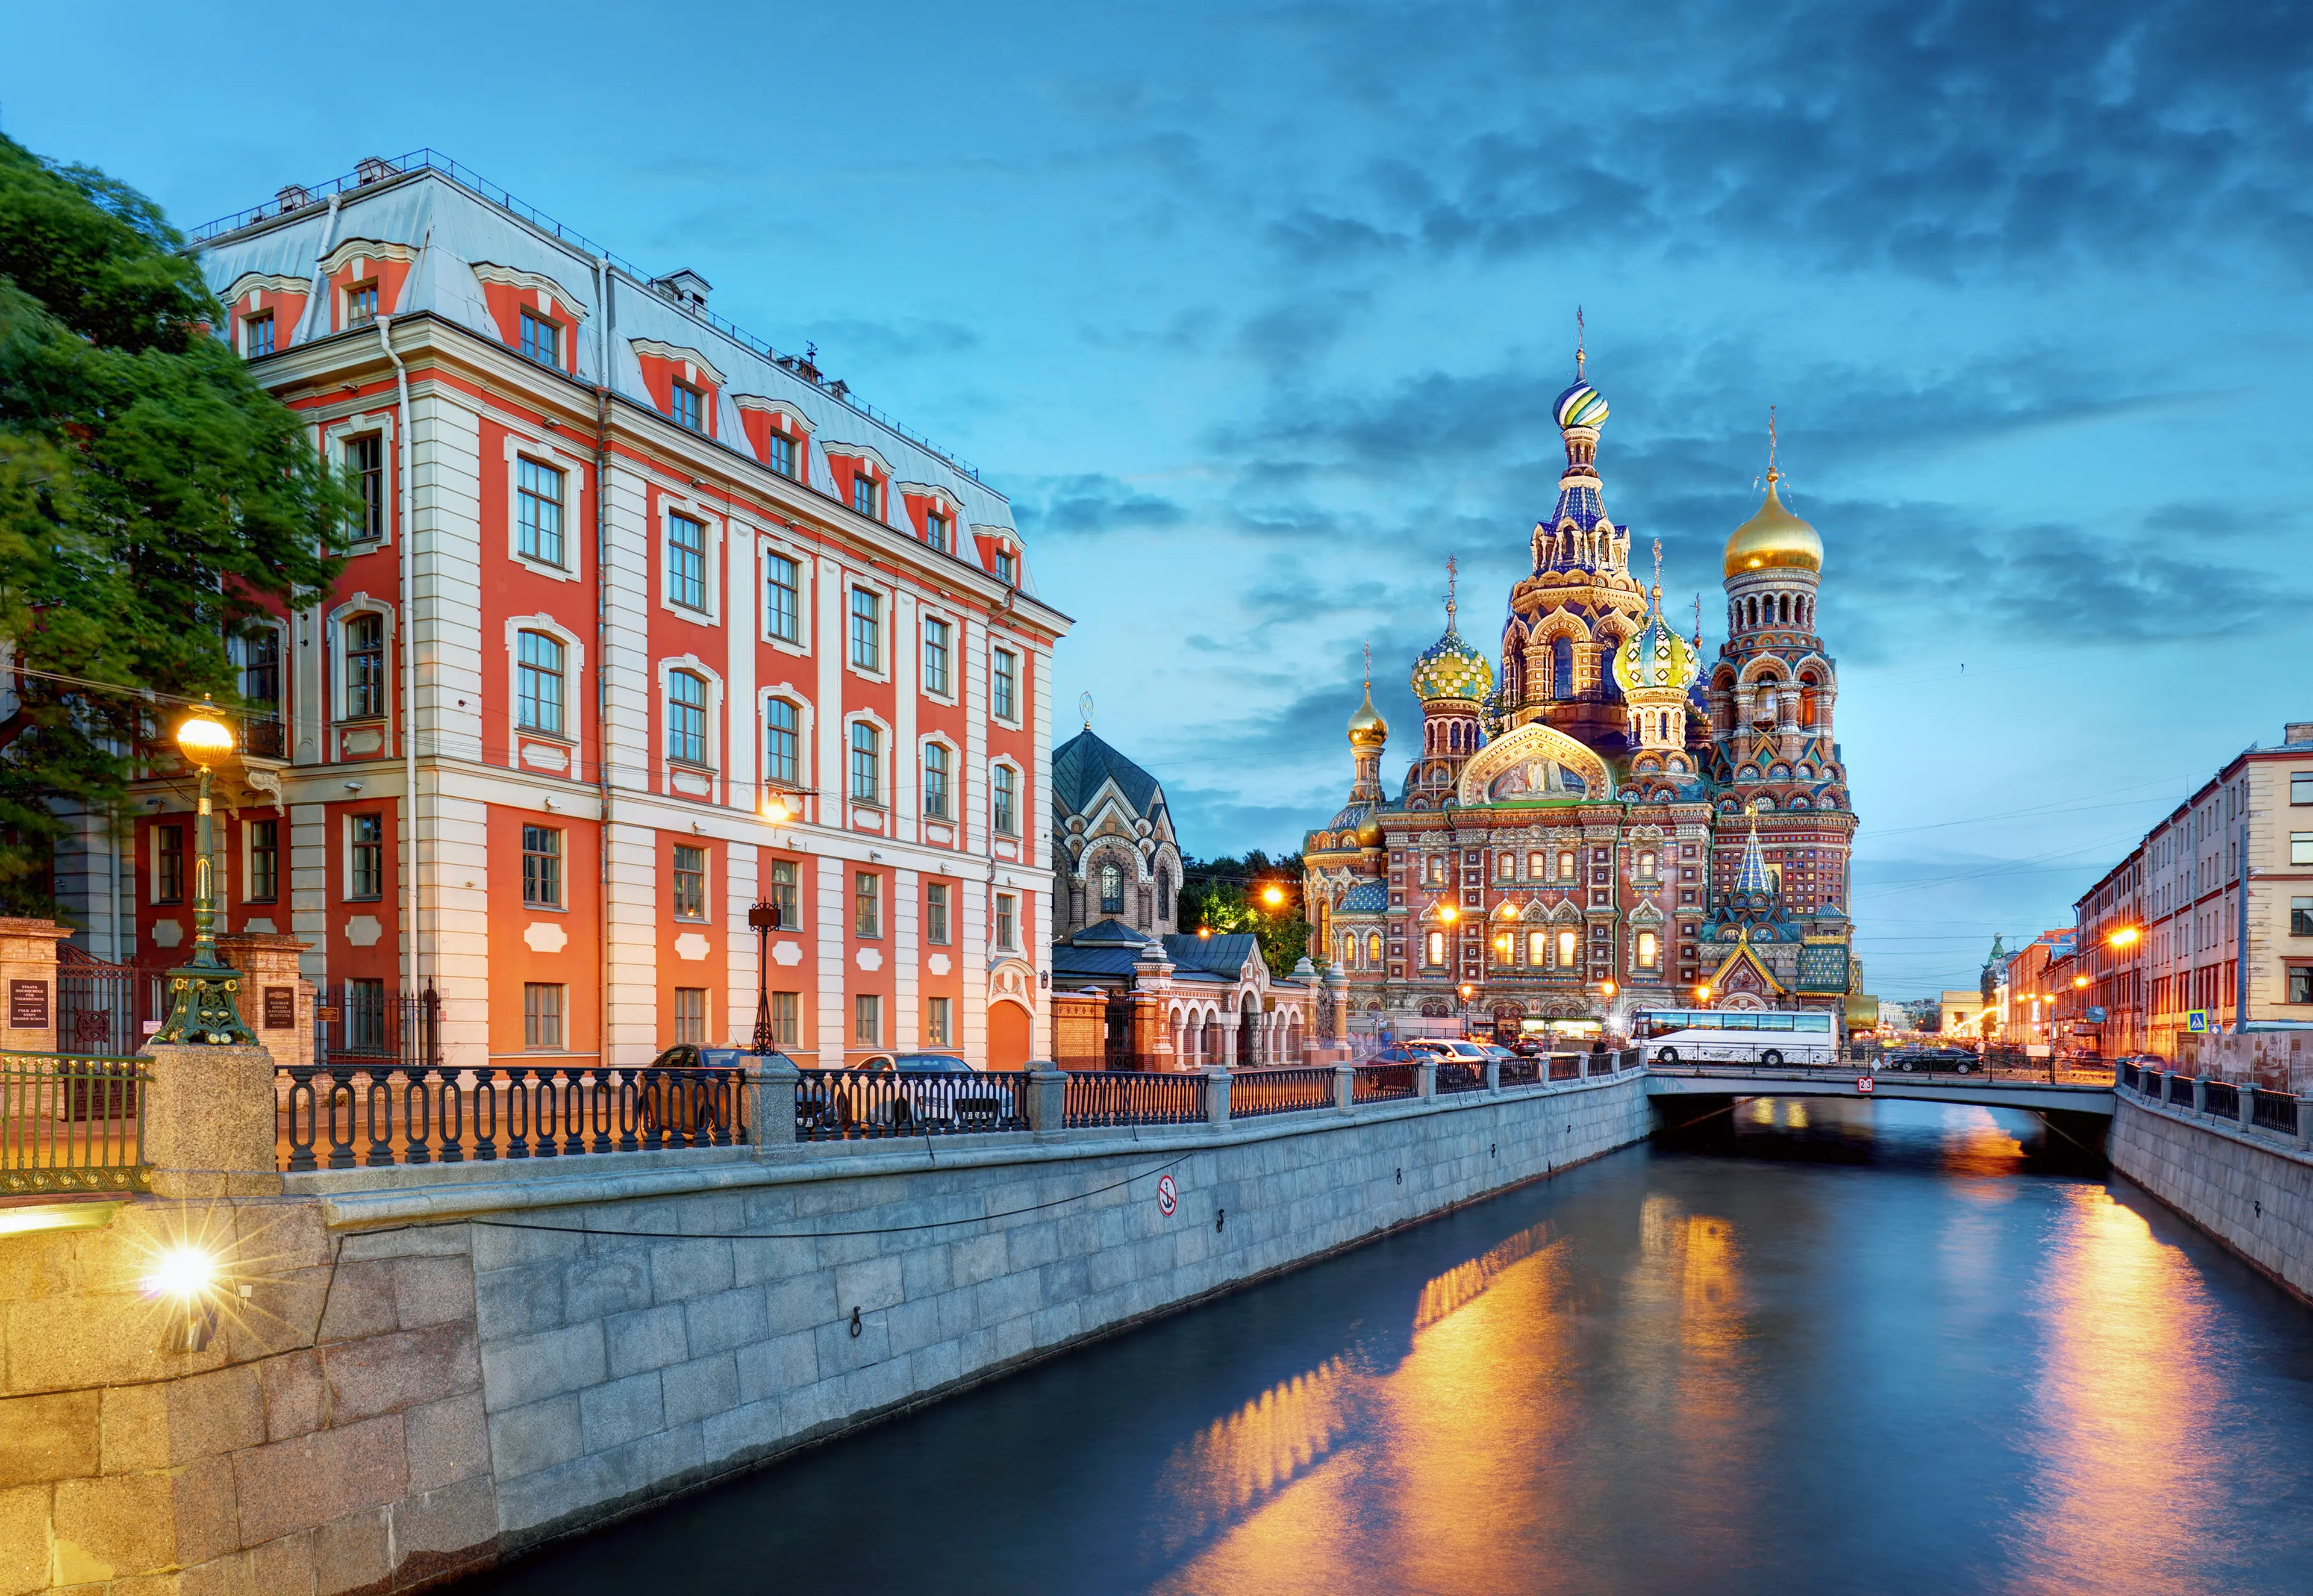 3-Day Locals Guide: Sightseeing and Shopping in Saint Petersburg